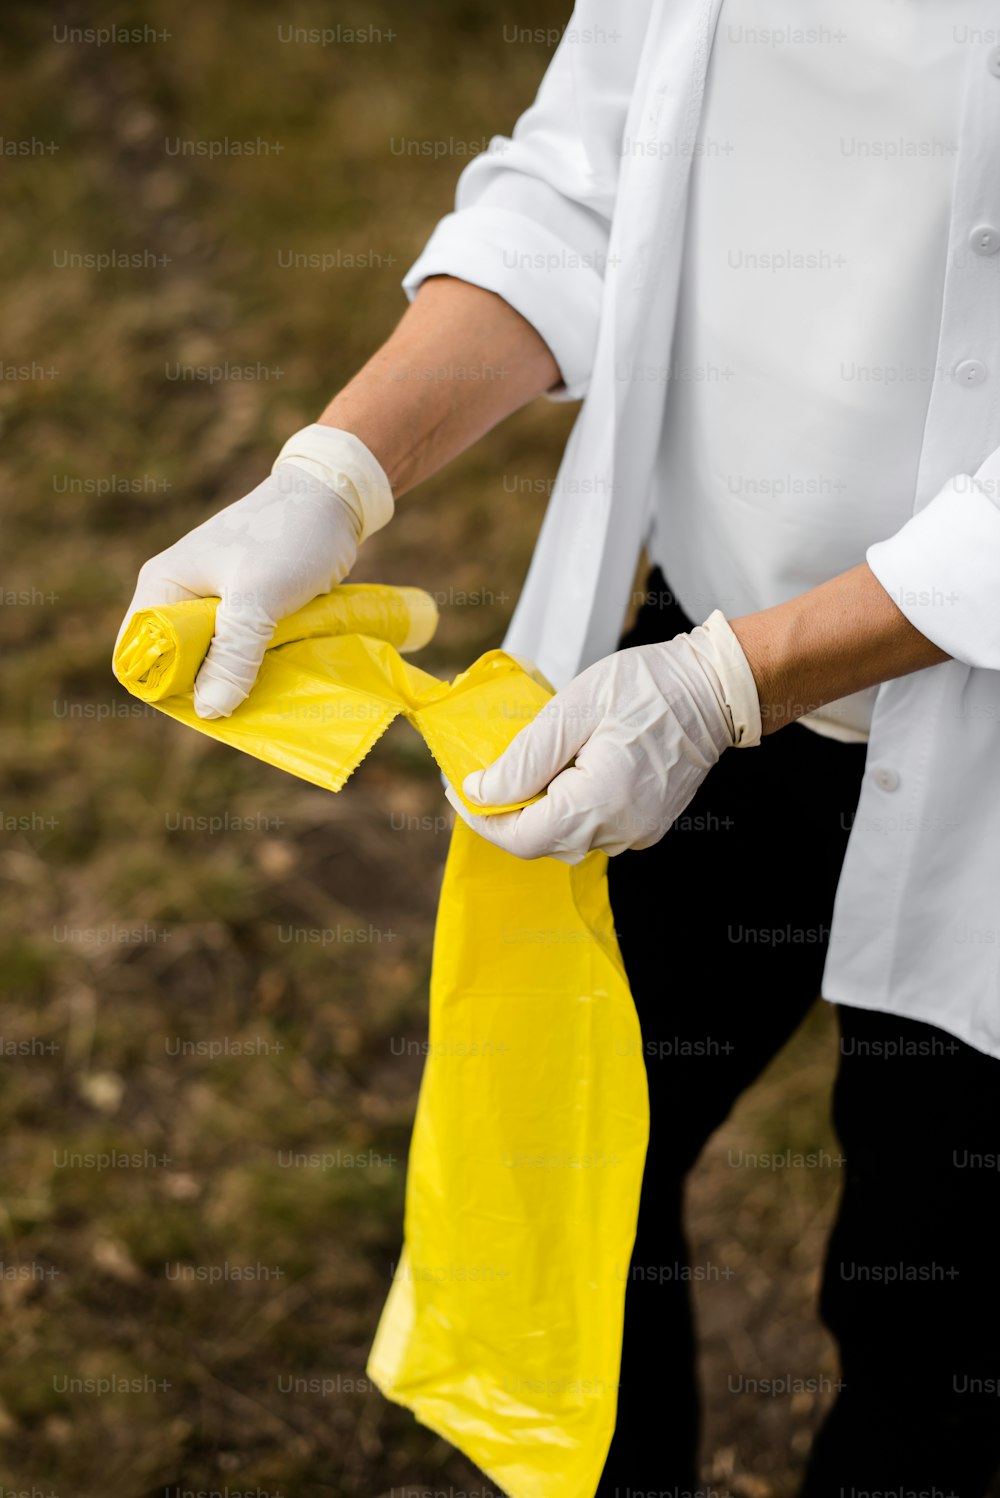 a person in a white shirt is holding a yellow bag